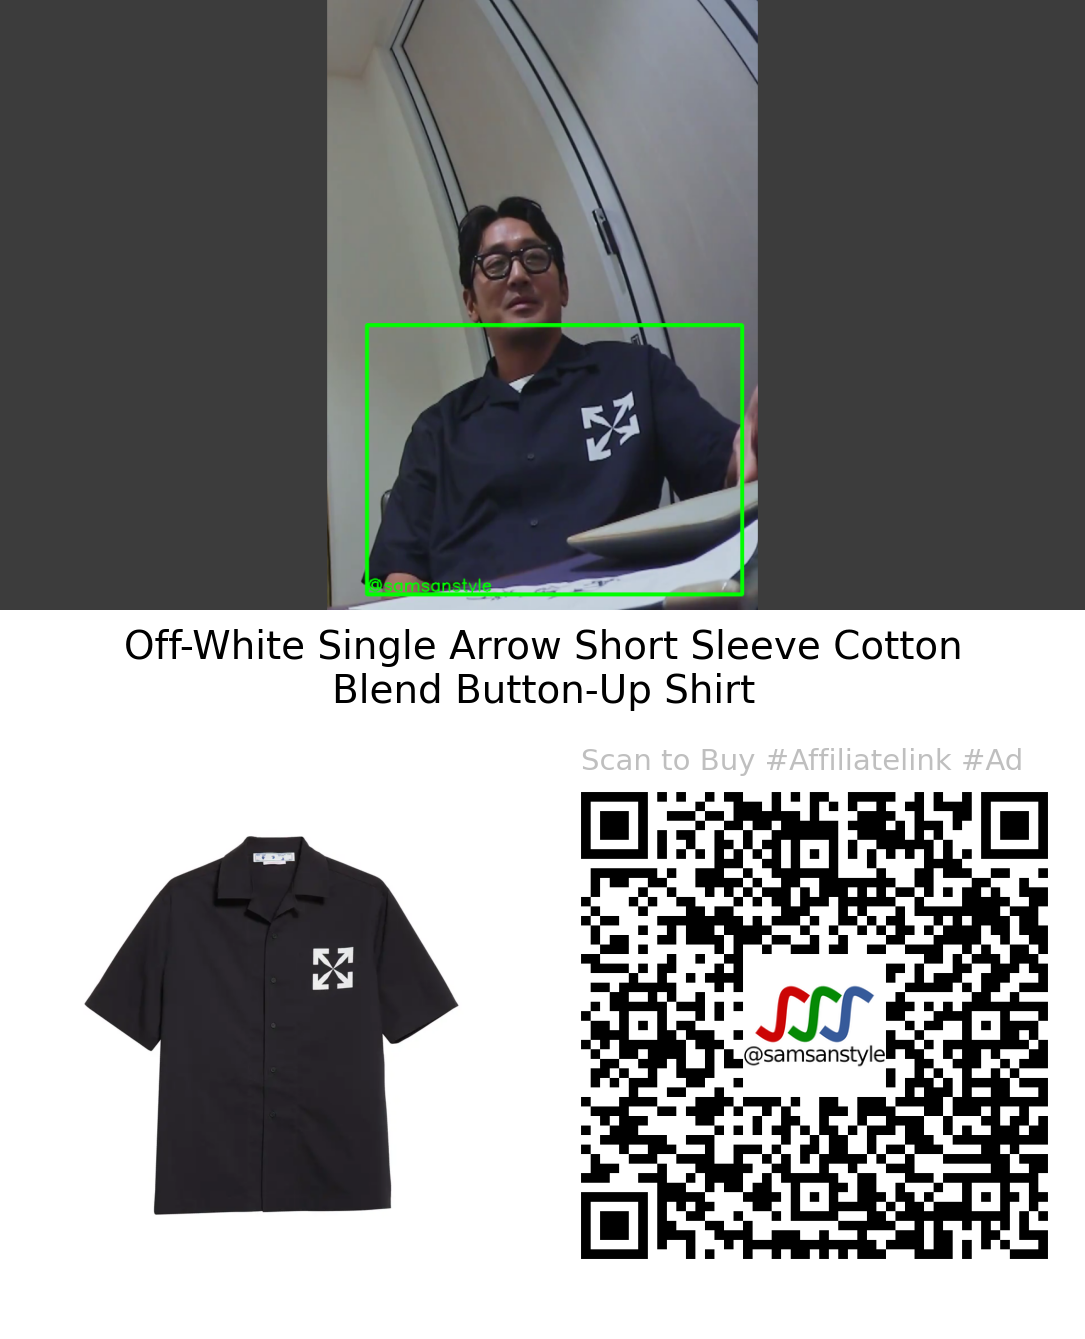 Ha Jungwoo | Bros on Foot S01E01 | Off-White Single Arrow Short Sleeve Cotton Blend Button-Up Shirt